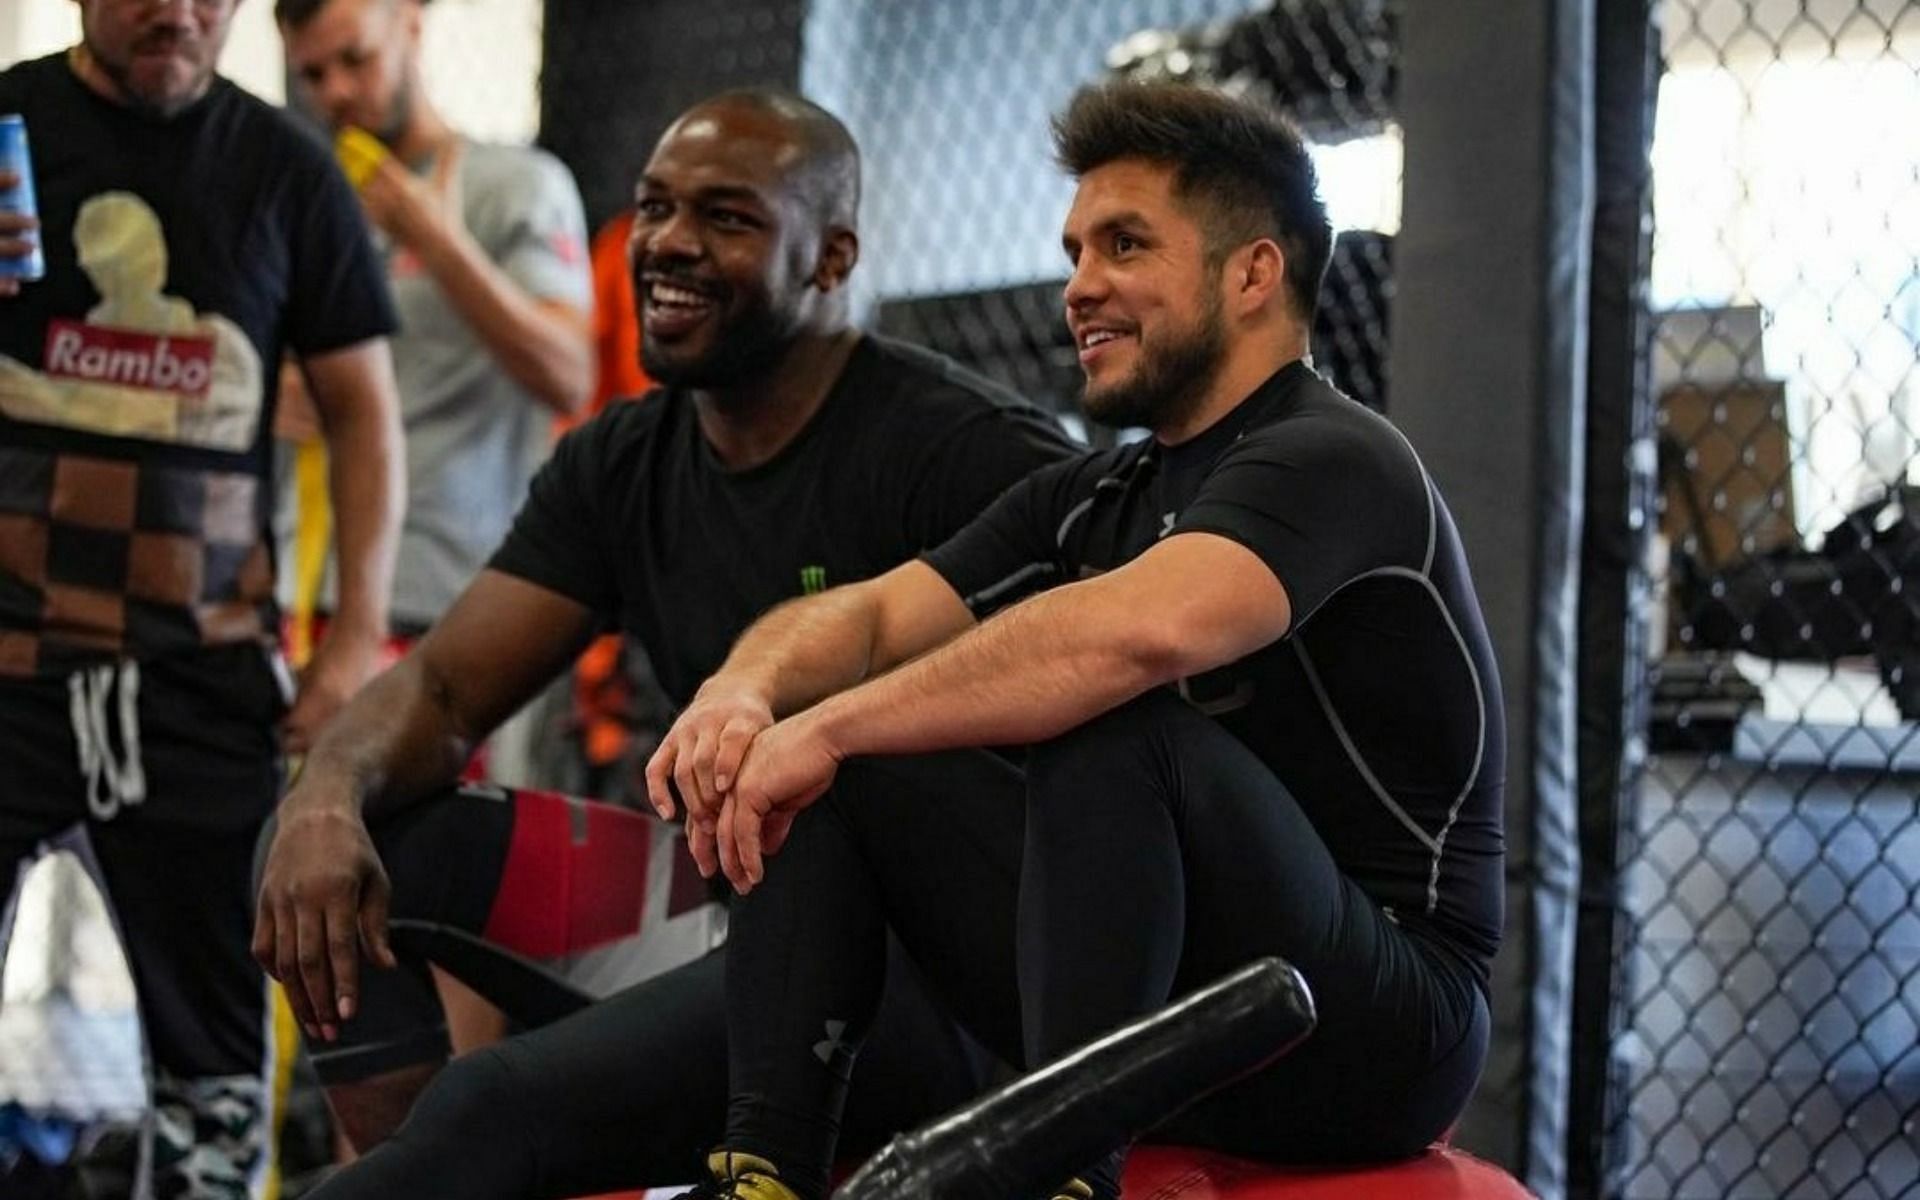 Former UFC champions Jon Jones (left) and Henry Cejudo (right) at the Fight Ready training facility [Image Credit: via @henry_cejudo on Instagram]